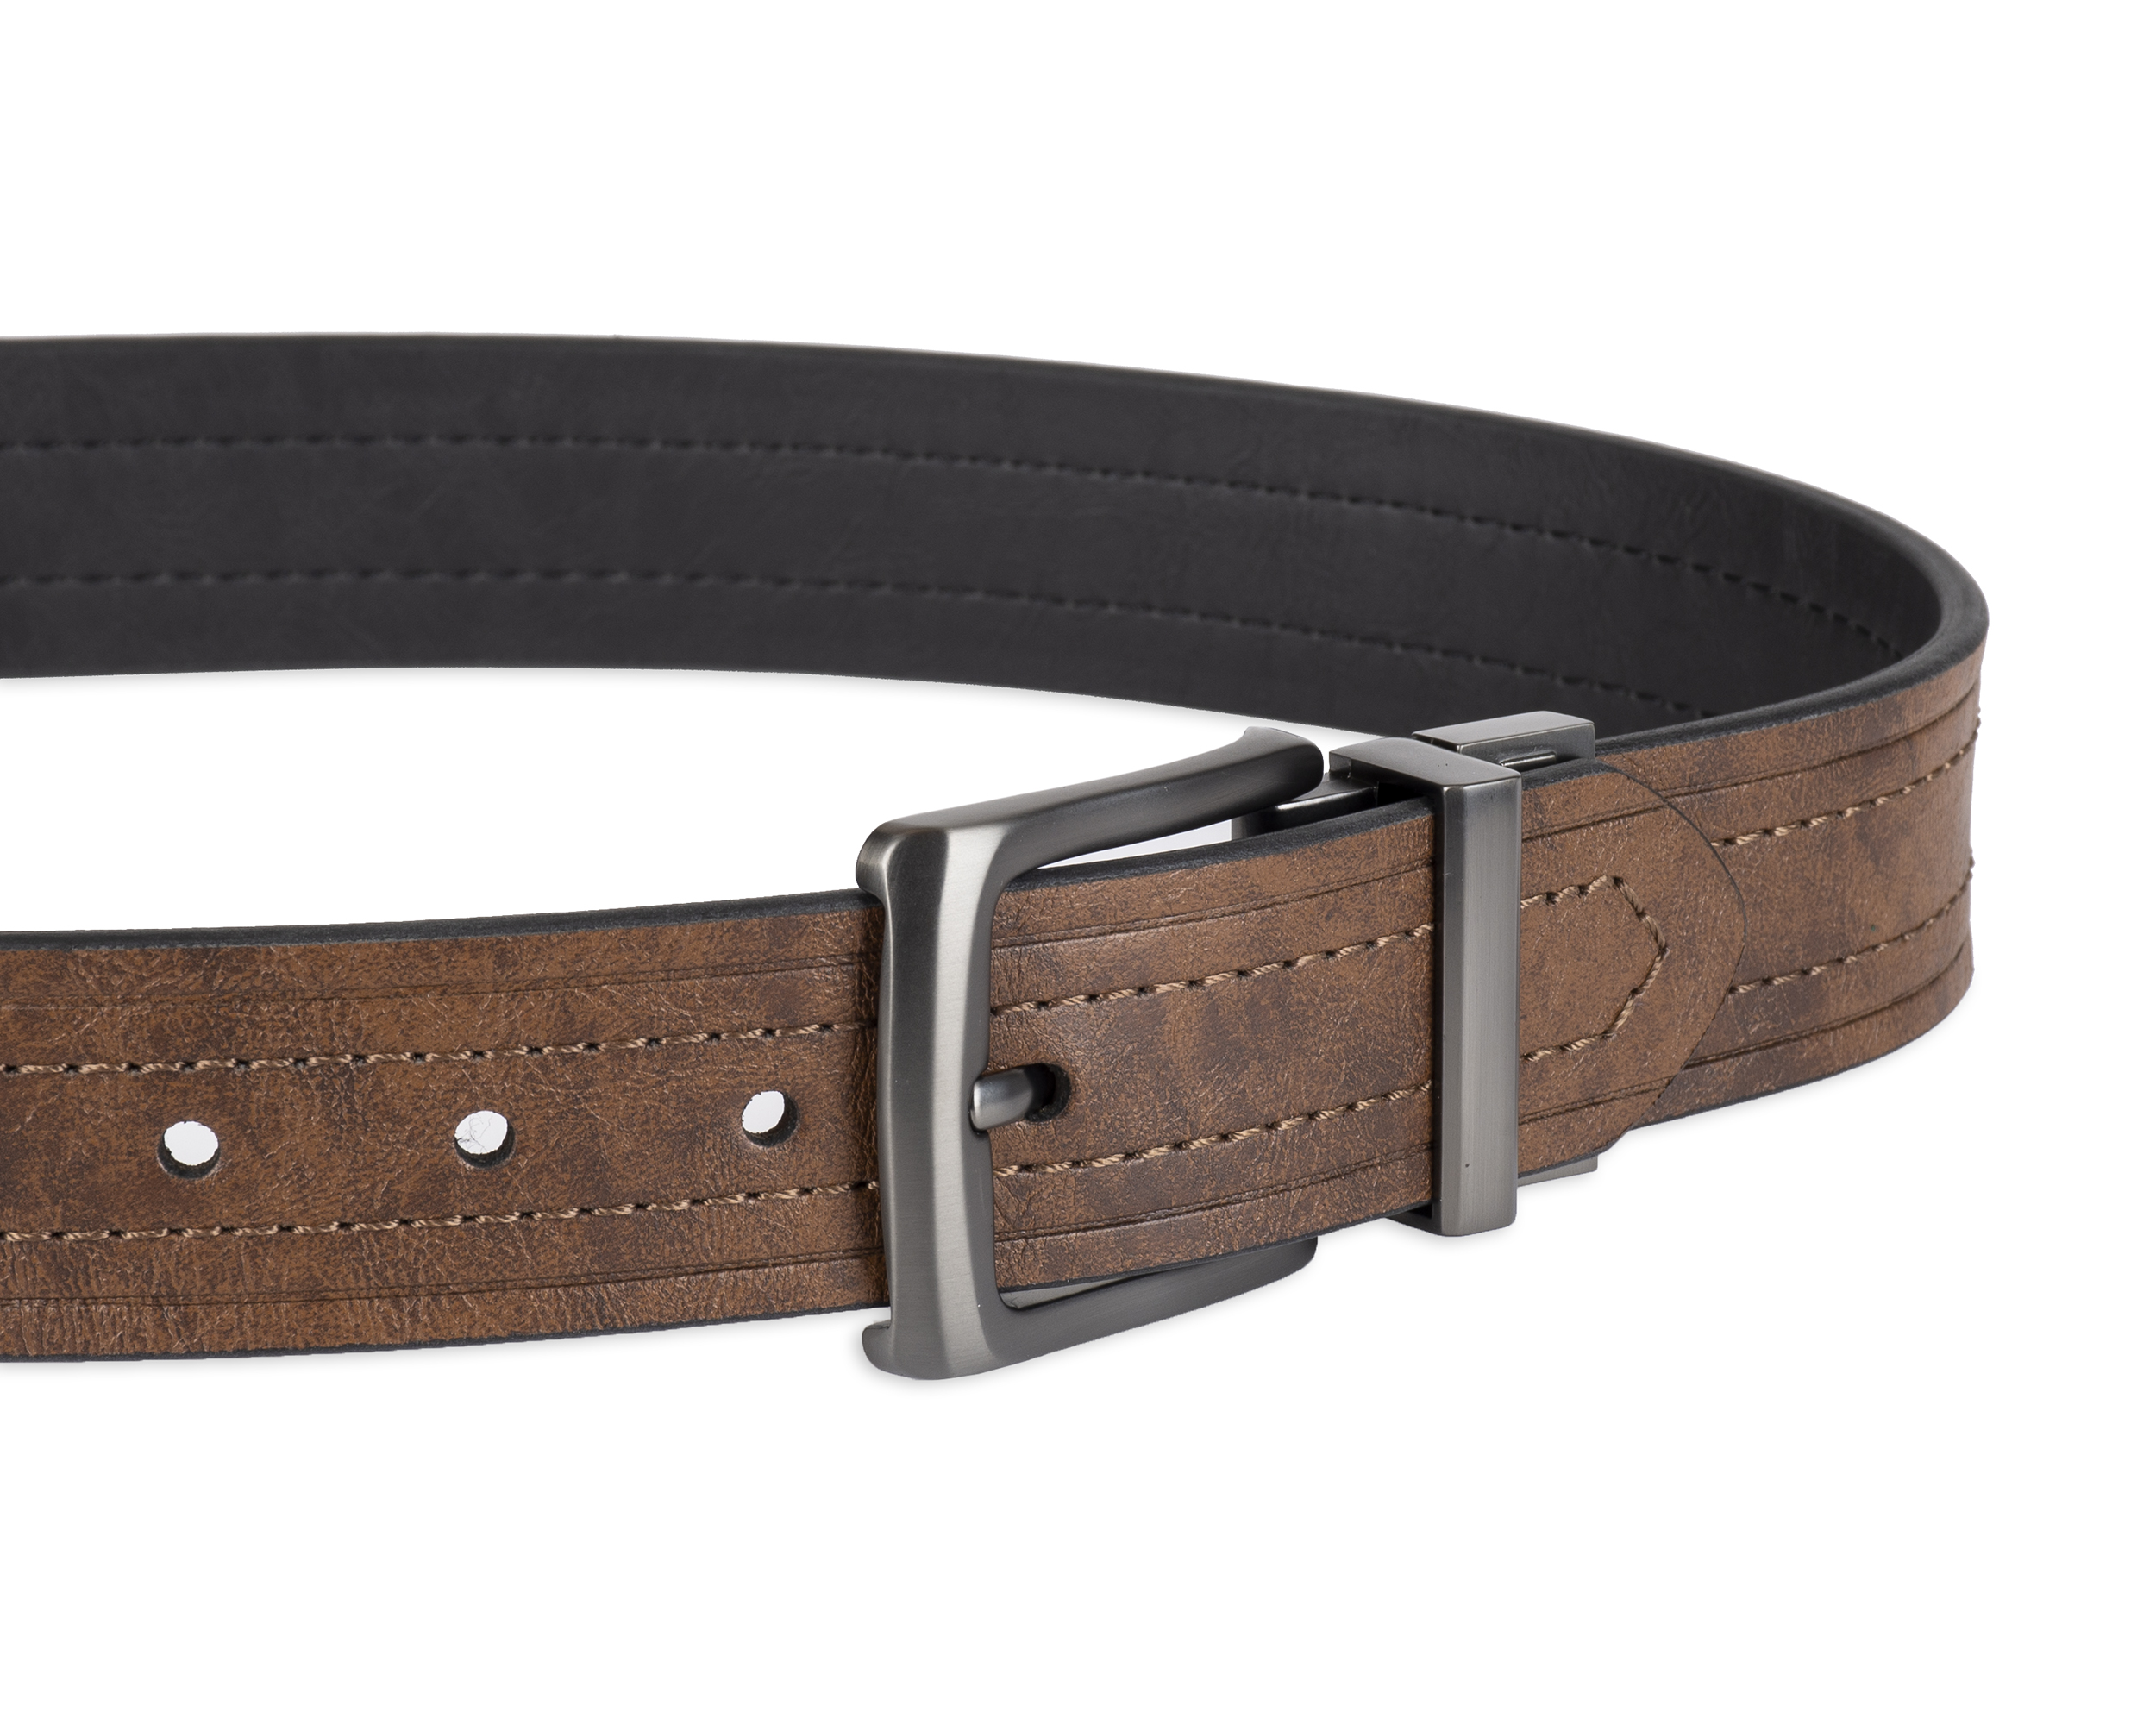 Levi's Men's Two-in-One Reversible Casual Belt, Brown/Black - image 4 of 9